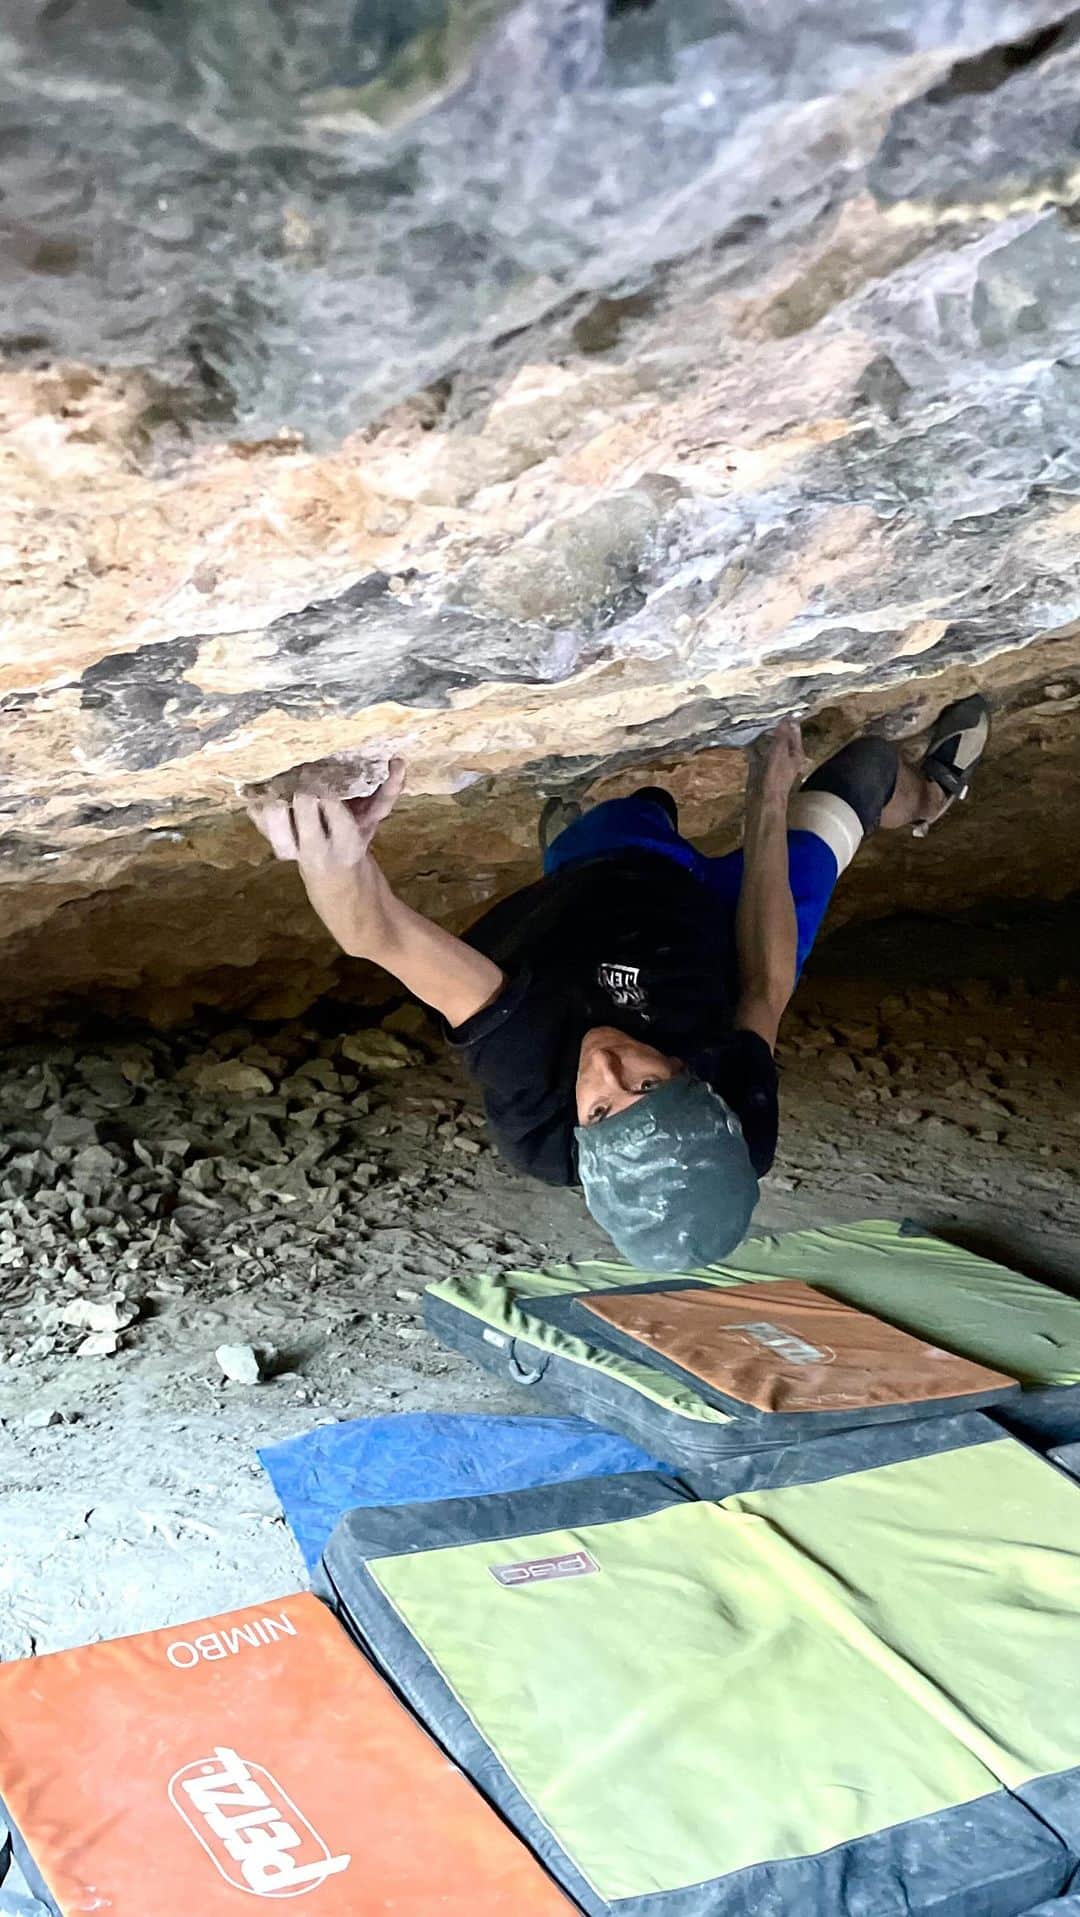 デイブ・グラハムのインスタグラム：「Cassim [8C] FA ⚔️ On November 2 I climbed a project of mine in the Ali-Baba cave in Rodellar 🥳 A true sit- start beginning at the base of the cave (in my opinion the most logical and integral line to do) it adds a technical, yet quite powerful 8A/+ boulder of 9 moves riddled with tensiony knee-scums directly into a super tricky and tense 8B 😅 The problem gives zero respite, cruising through crimps, pinches, and strange blocks, with a definitive crux revolving around a super tricky kneebar which only works to due a complicated array of toe-hooks 🤪 The boulder continues into the ending of Ali Baba, topping out the classic exit to the left. With around 35 hand moves, and many more foot moves, the level of resistance really adds to the difficulty, even though the moves get less difficult towards the ending, the super steep angle and lack of rests creates a rather unique challenge of not getting to exhausted and maintaining tension all the way until the final rest 😬 As I haven’t opened many hard boulders on limestone I’m less experienced grading problems on this type of stone, but it took me a considerable amount of tries over 10 days, and I had already put in about 10 sessions back in 2020. It felt way harder then long blocs in Switzerland I climbed recently, so lets what future repetitors think 🤔 I would go as far as saying it’s a style the suits me really well, as most of the cruxes are solved with your knees, and for those who may say its a route because it’s so long, I would disagree. Definitely a modern boulder problem, it happens to have a lot of moves not for its length or proportions, but more so because the intricate style of climbing 🙌🏻 I was always enchanted by this left flank of the cave, which from far away may not look to inspiring, but with a closer look the angle of the wall and hold-set is fuckin mega, and the fact its fully natural adds even more fuego 🔥 I was close to sending a harder line that I am super keen to go back and finish off. It seems to be a full grade harder in difficulty, and I could only manage to link it in two parts for this season 😵‍💫 Huge thanks to the homies in Rodellar and @alizee_dufraisse for the support 😘」